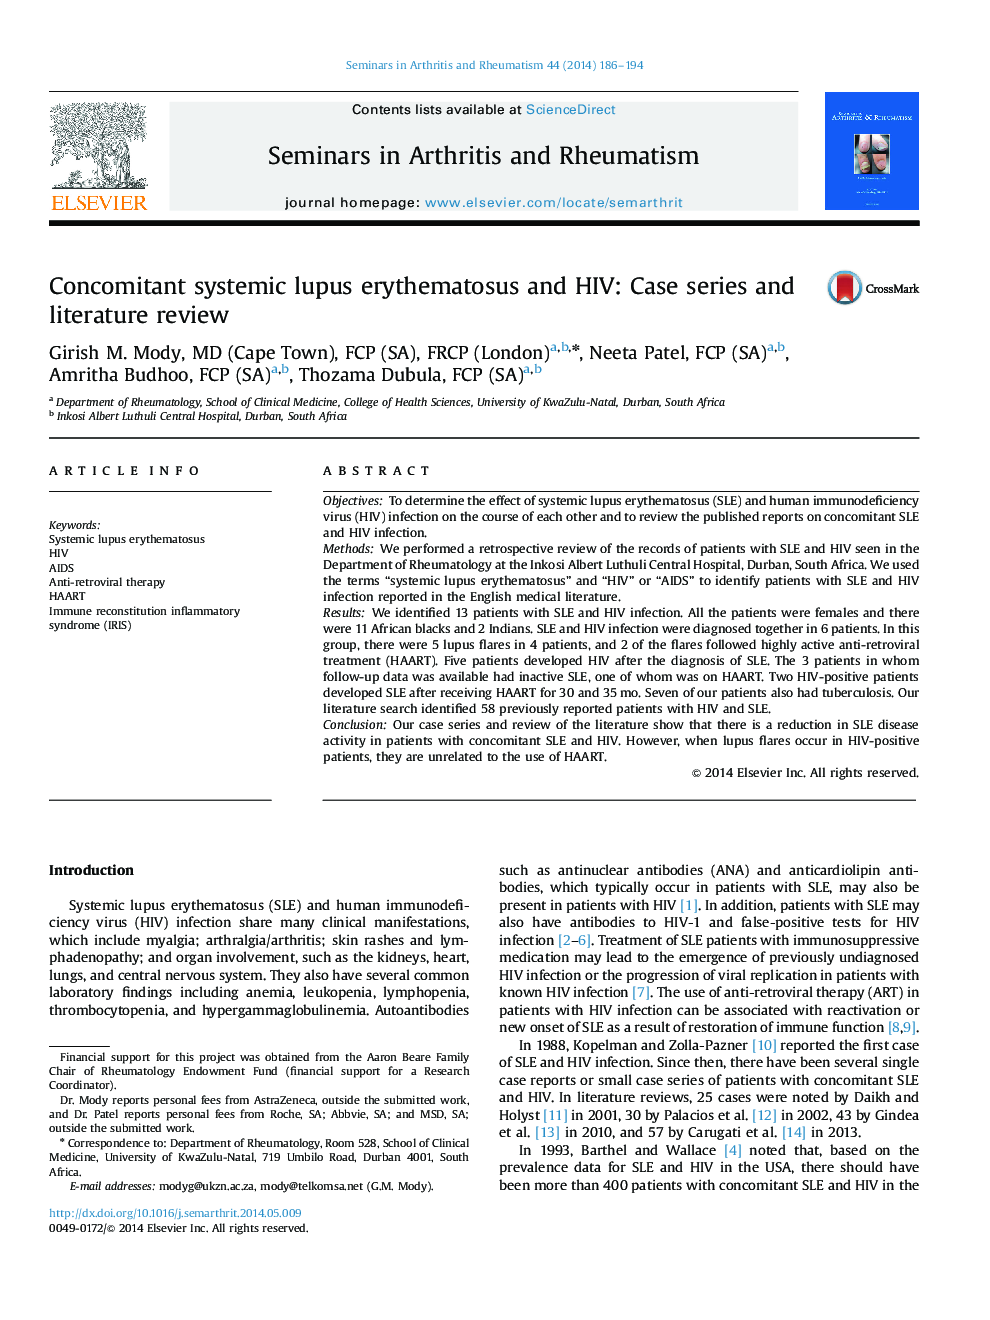 Concomitant systemic lupus erythematosus and HIV: Case series and literature review